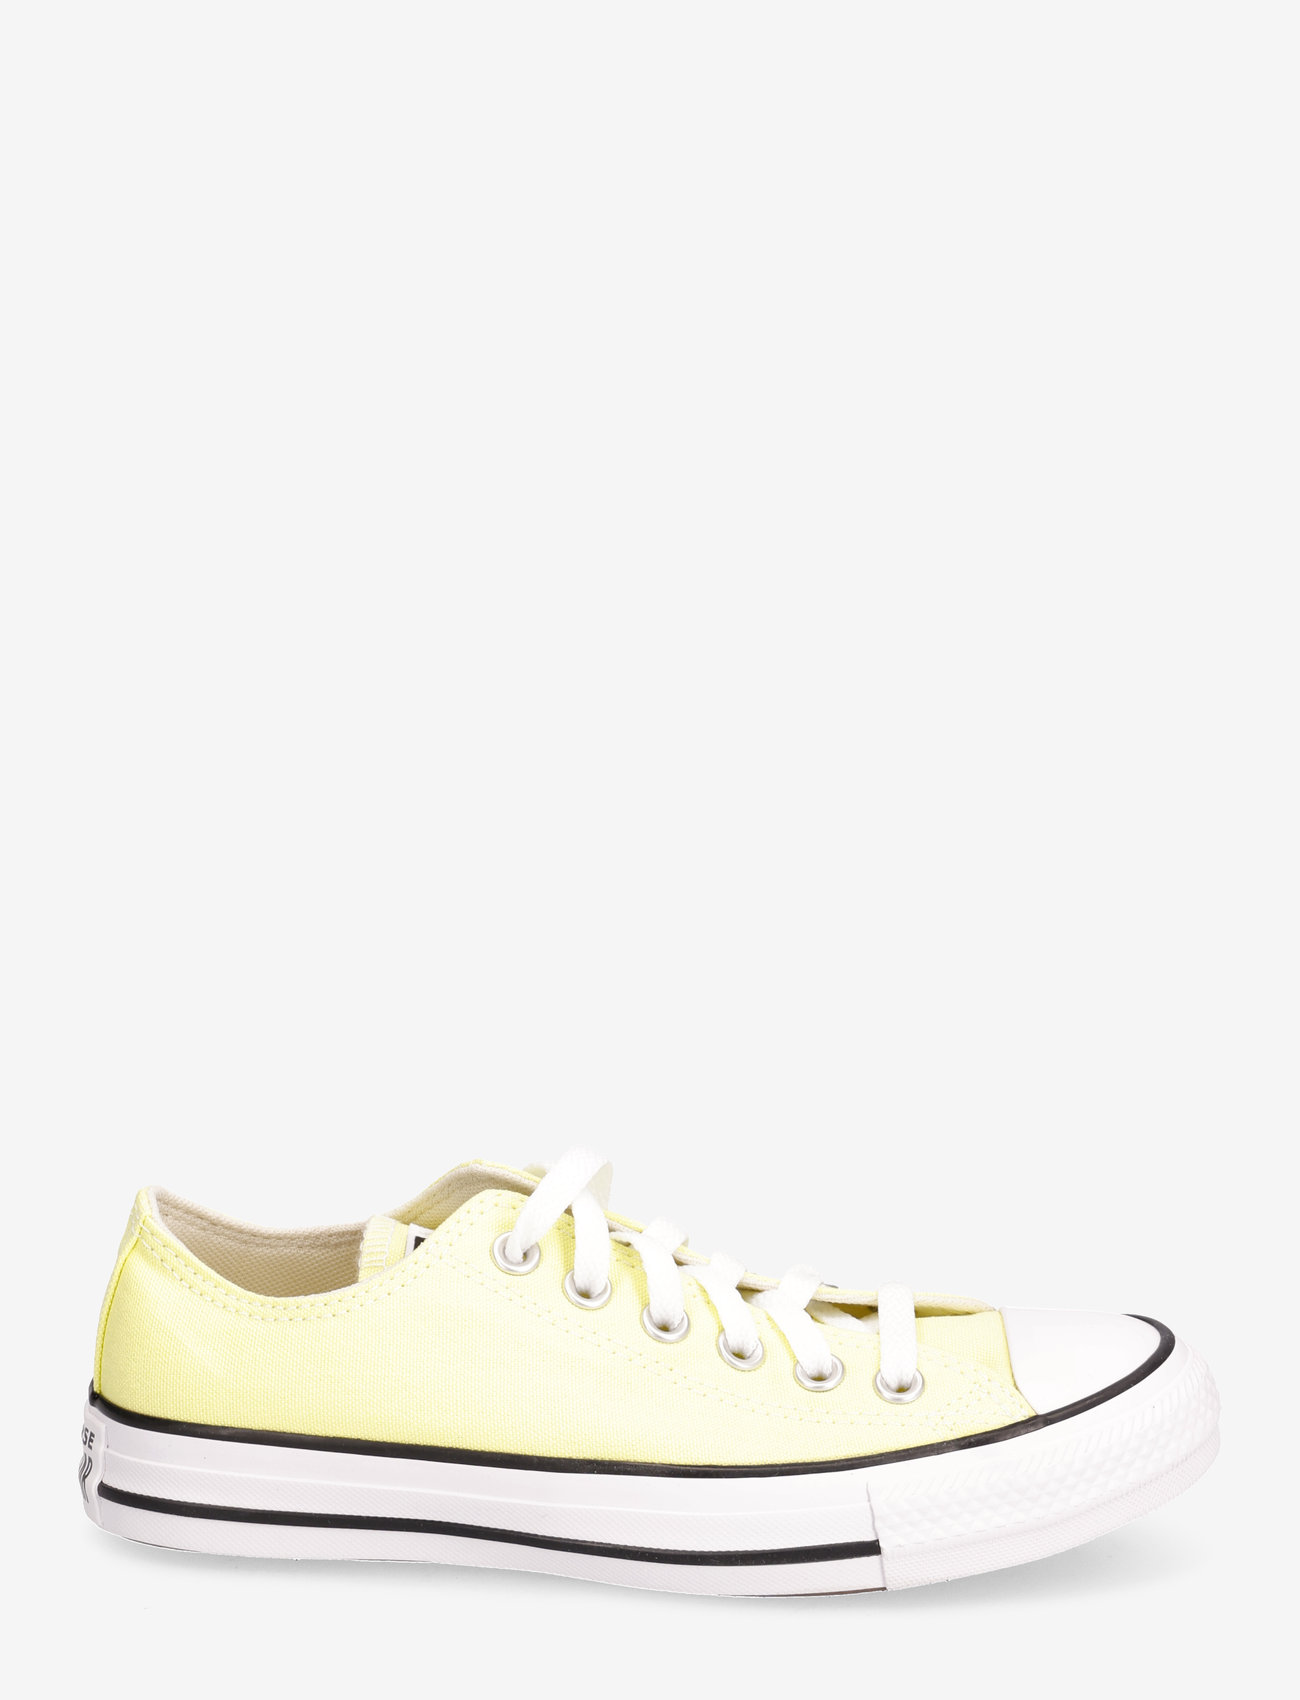 Converse - Chuck Taylor All Star - low tops - sour candy - 1